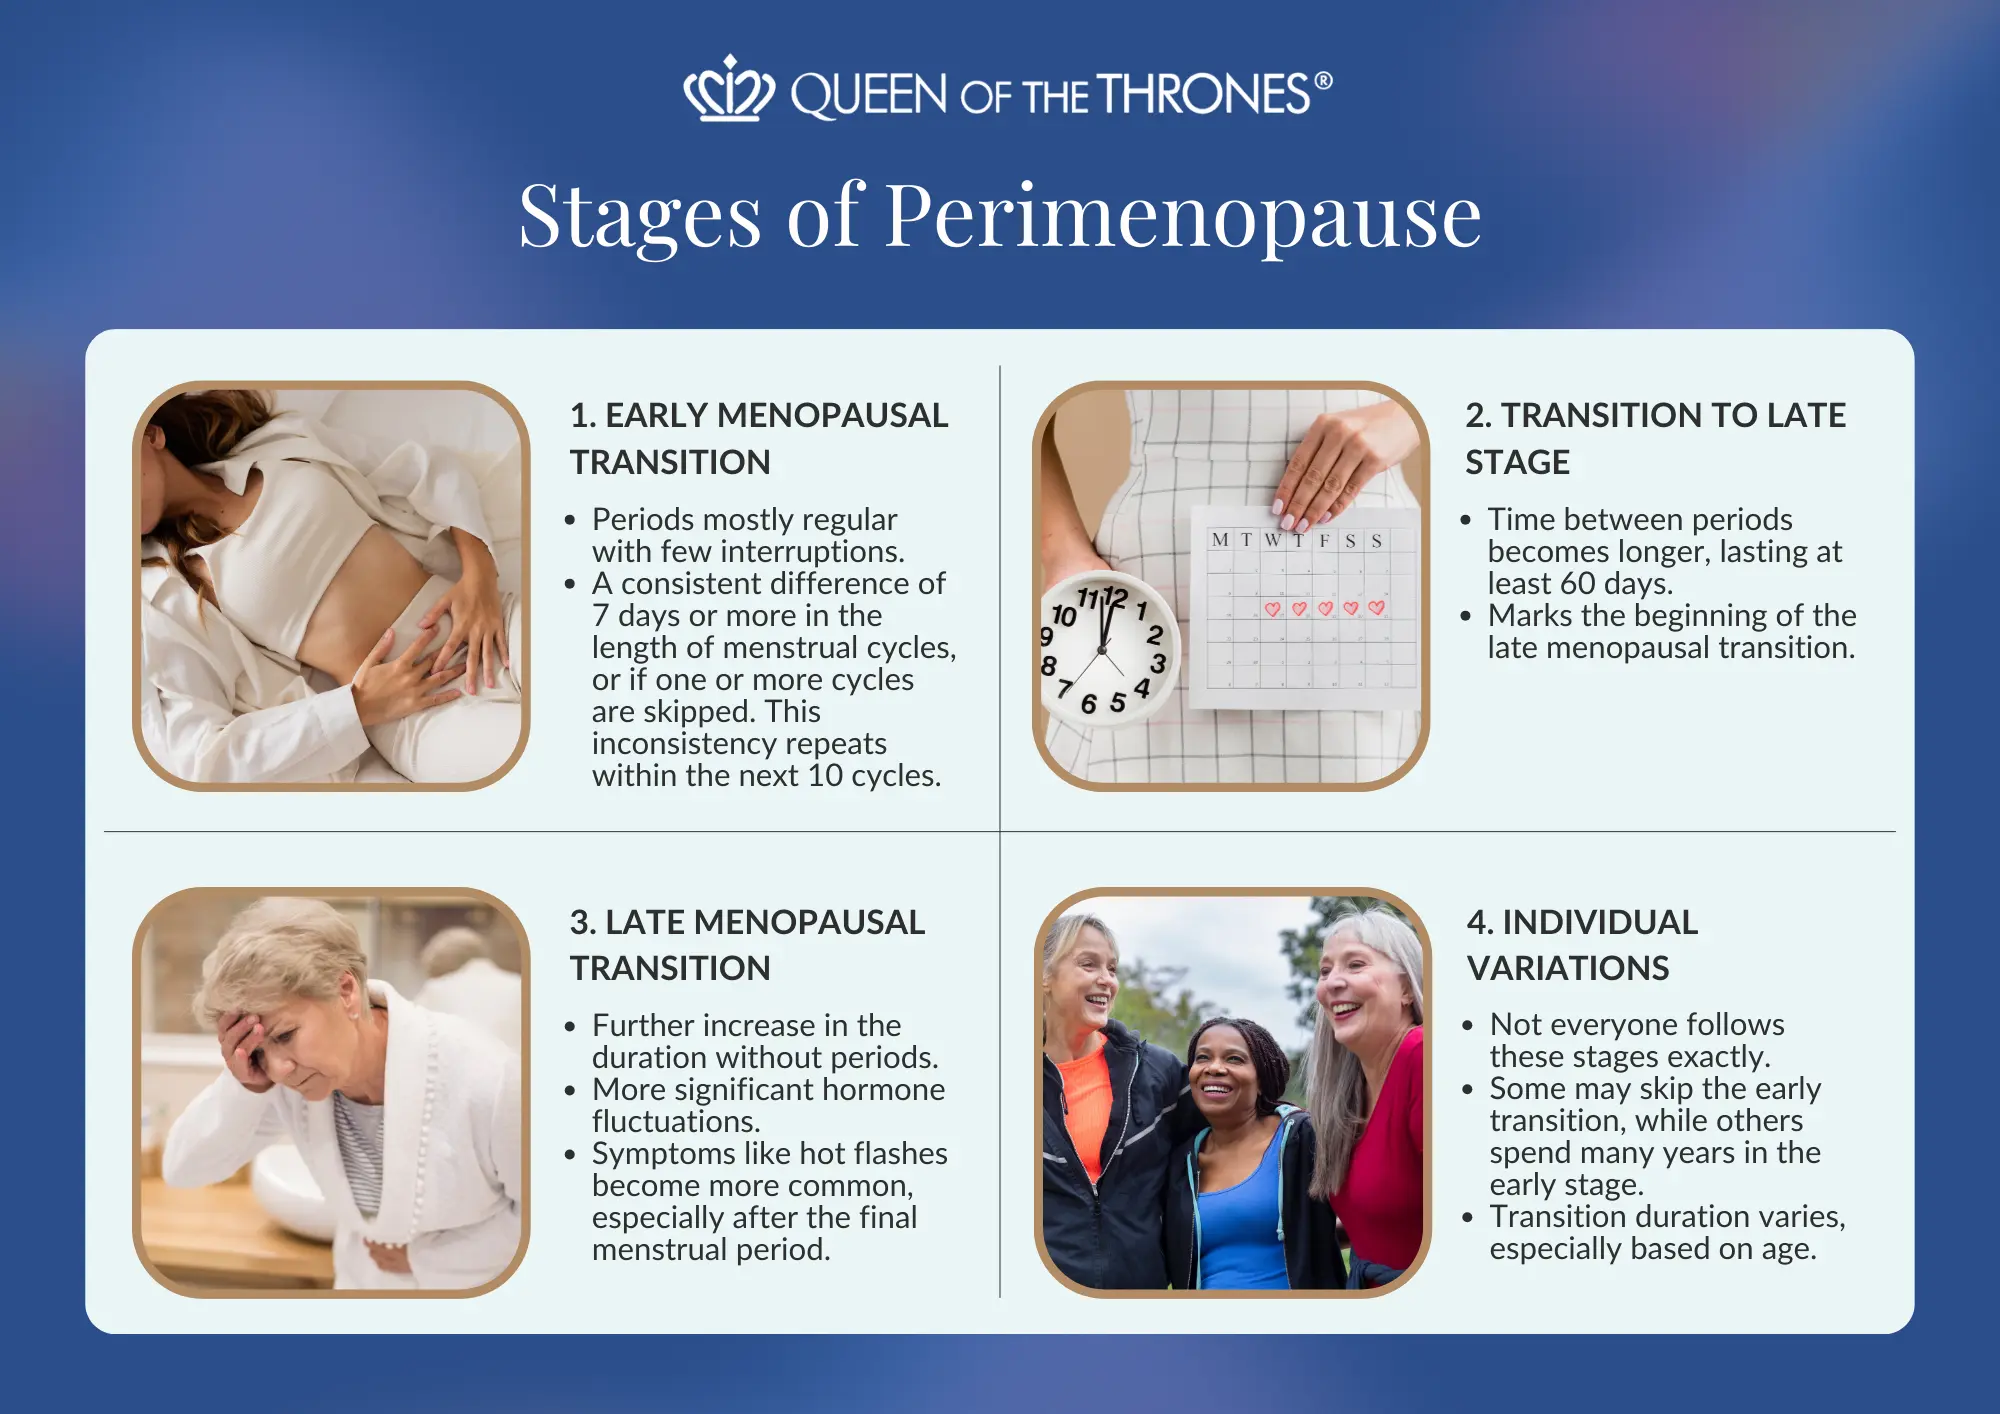 Stages of perimenopause by Queen of the Thrones